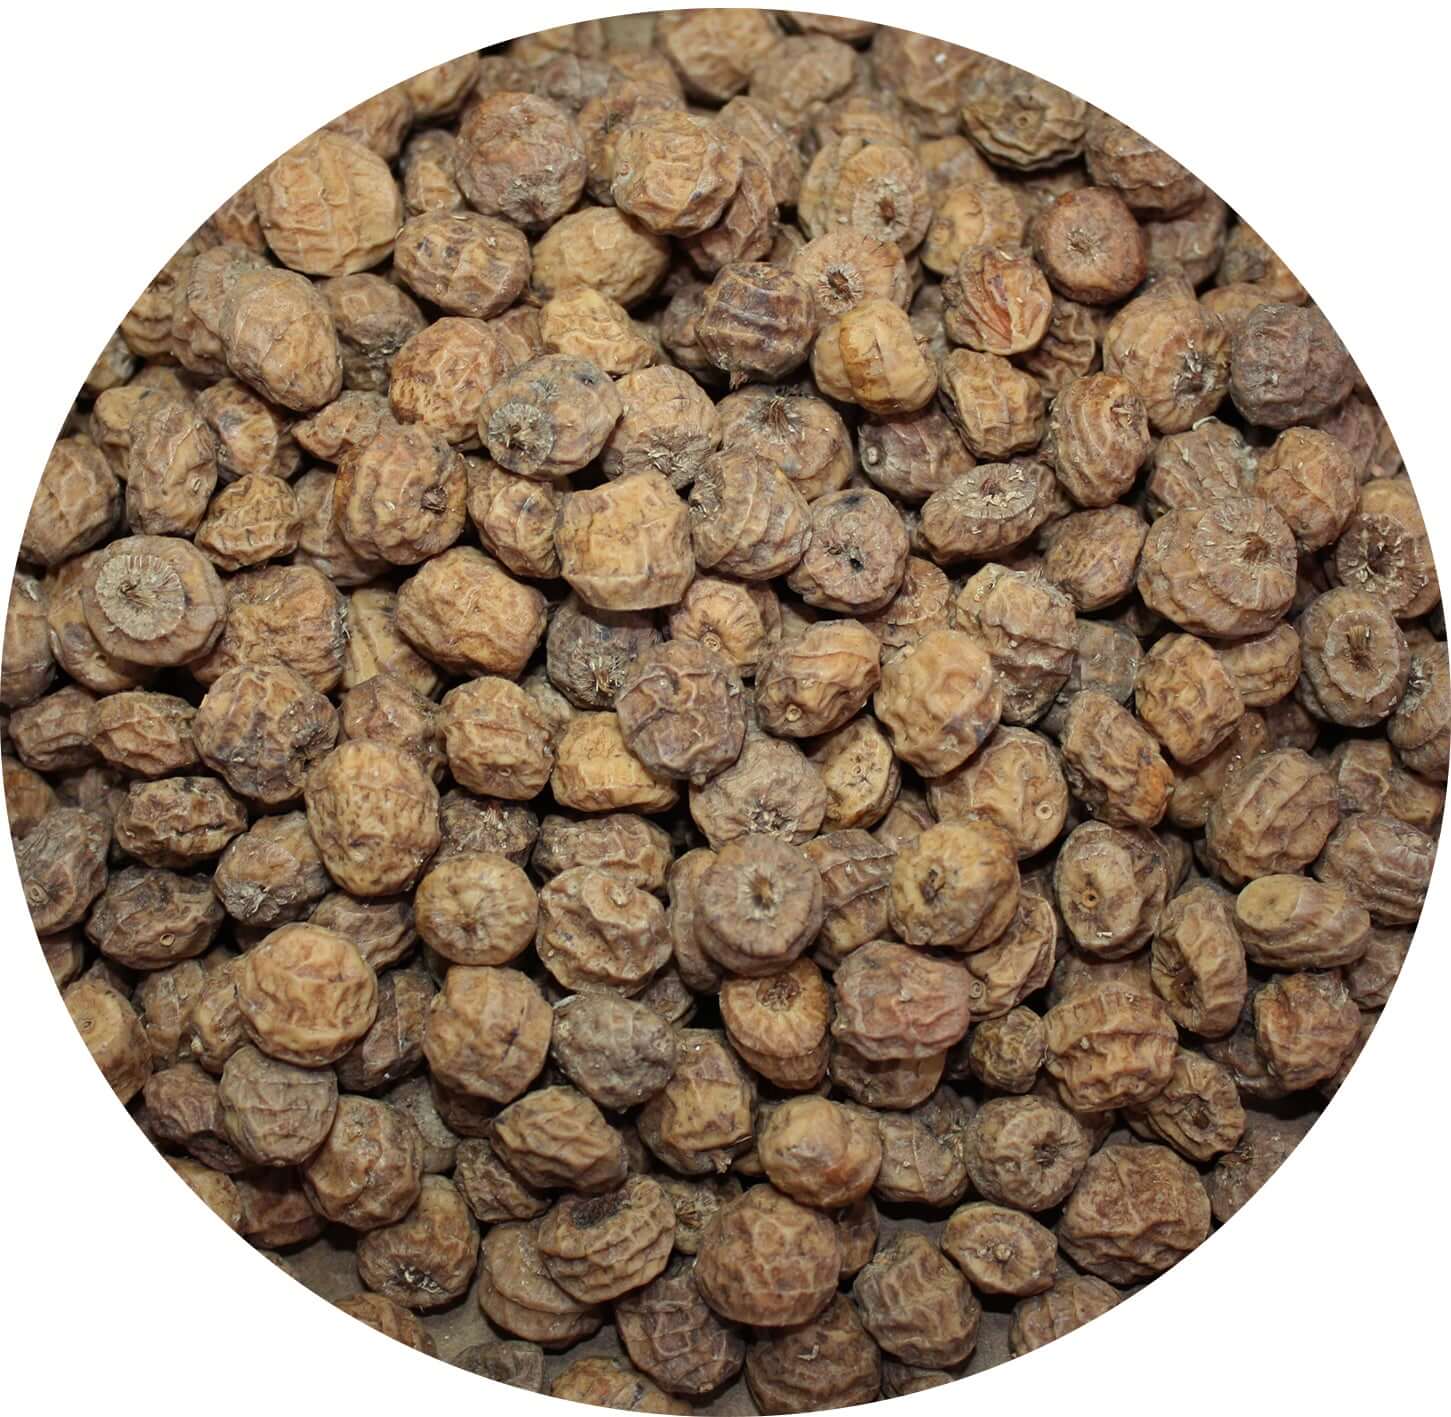 Tiger Nuts for fishing  Direct from Haith's carp fishing